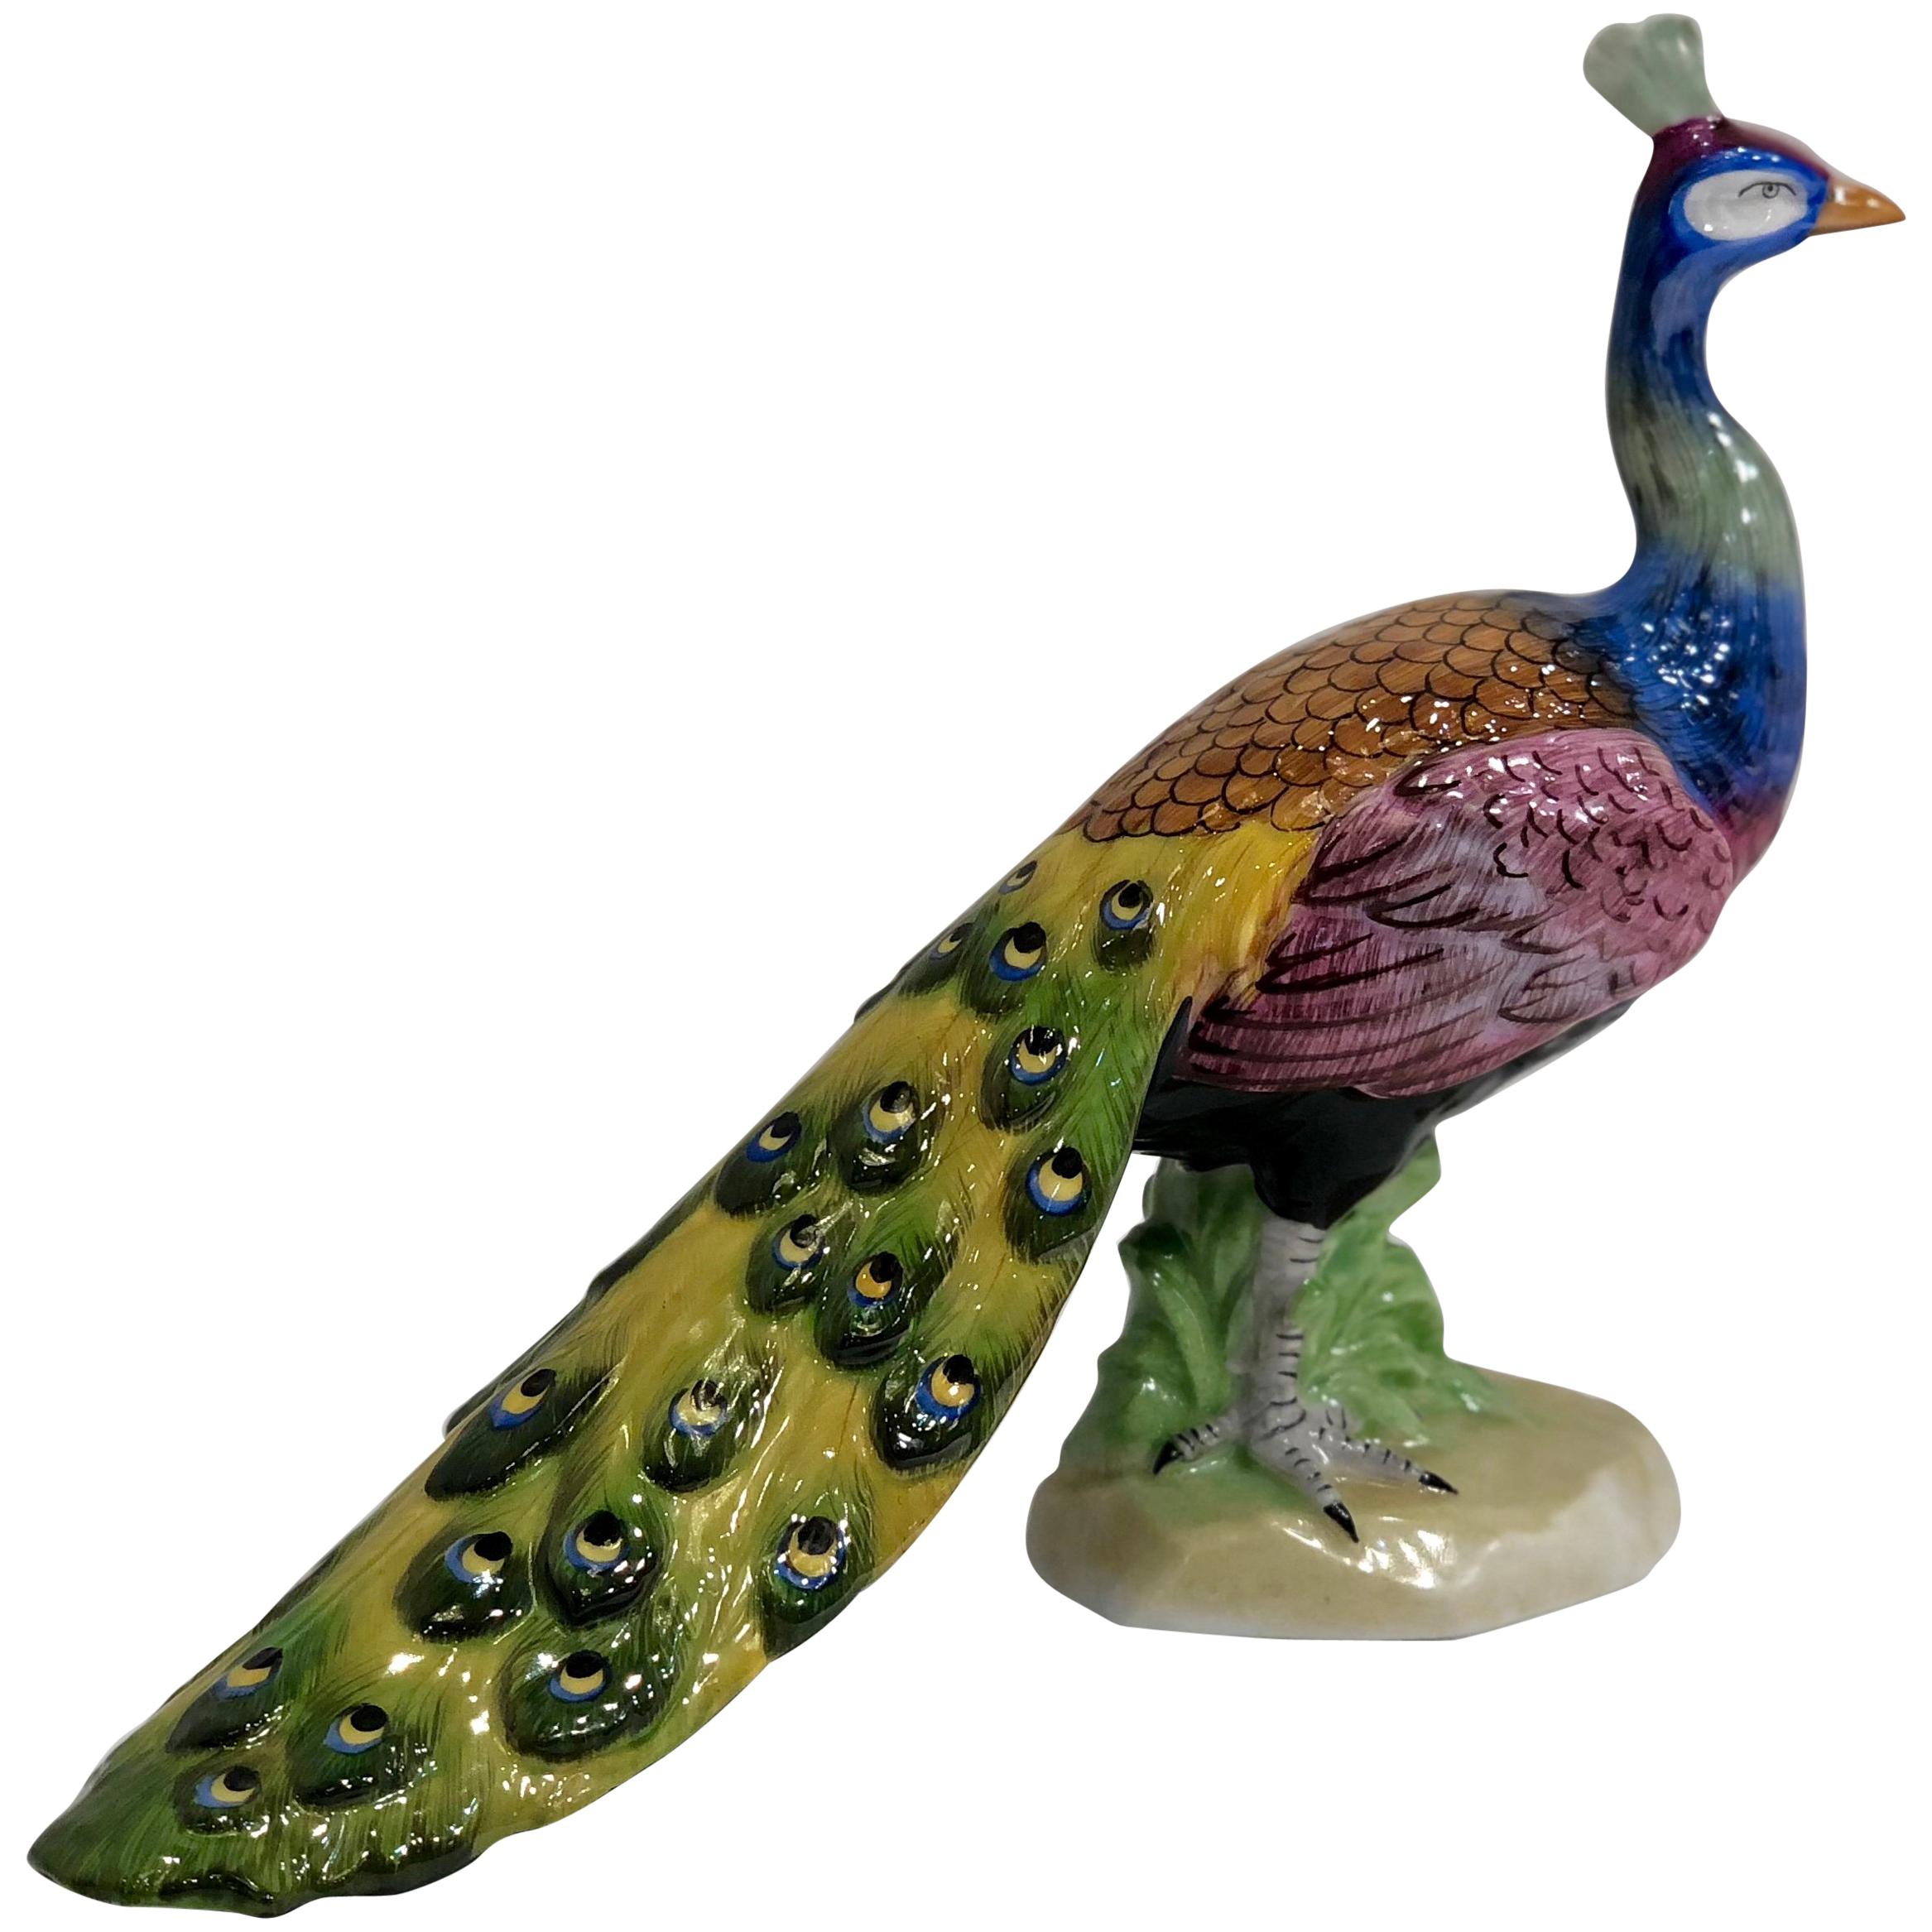 Exquisite Dresden Porcelain Peacock Tail Closed Facing Forward Figurine Germany